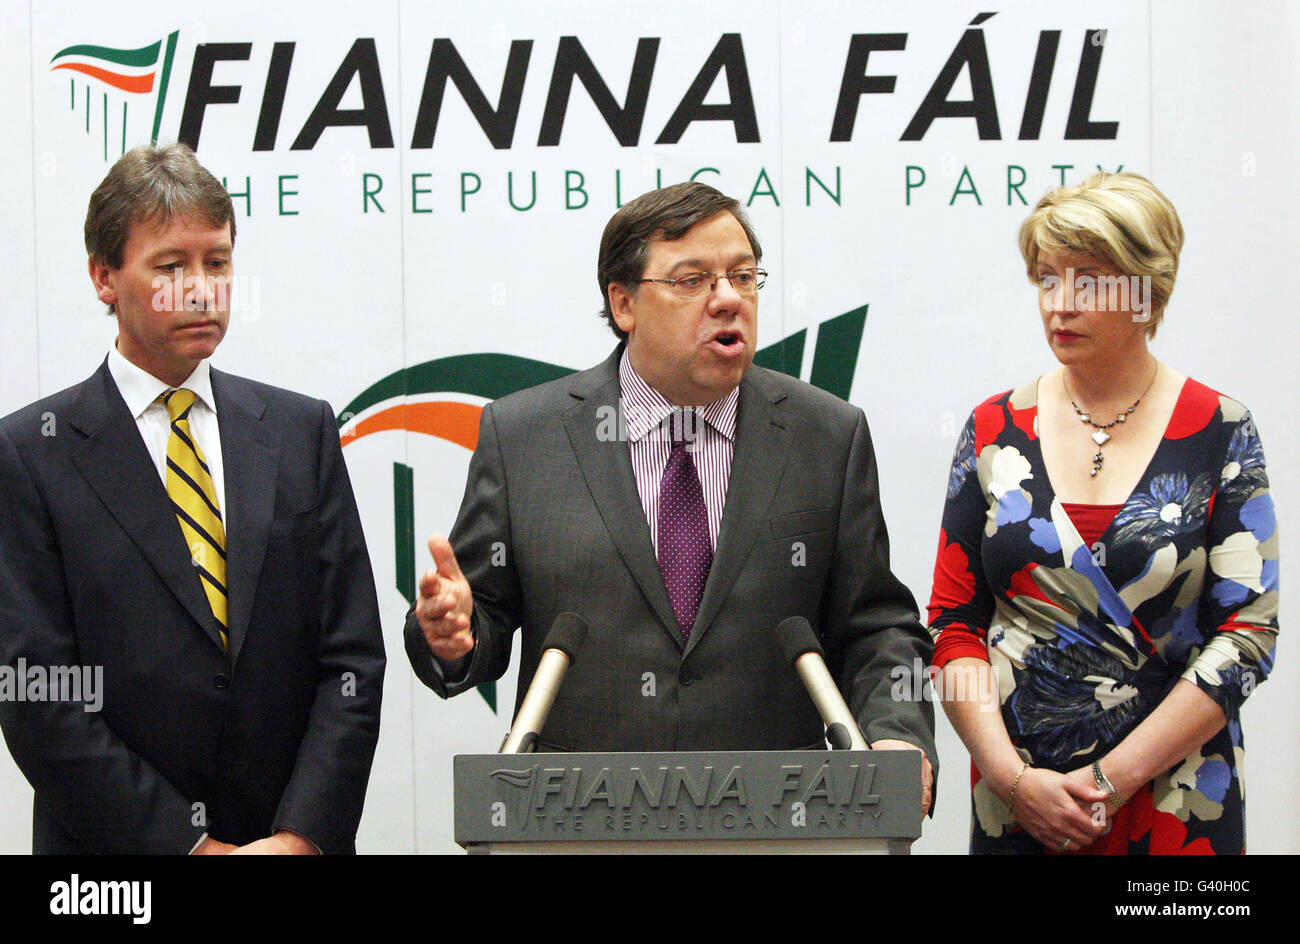 Taoiseach Brian Cowen speaks to the media during a press conference, flanked by Party Chief Whip John Curran and Tanaiste Mary Coughlan, at the Alexander Hotel in Dublin, where he confirmed he would remain as leader of his ruling Fianna Fail party. Stock Photo